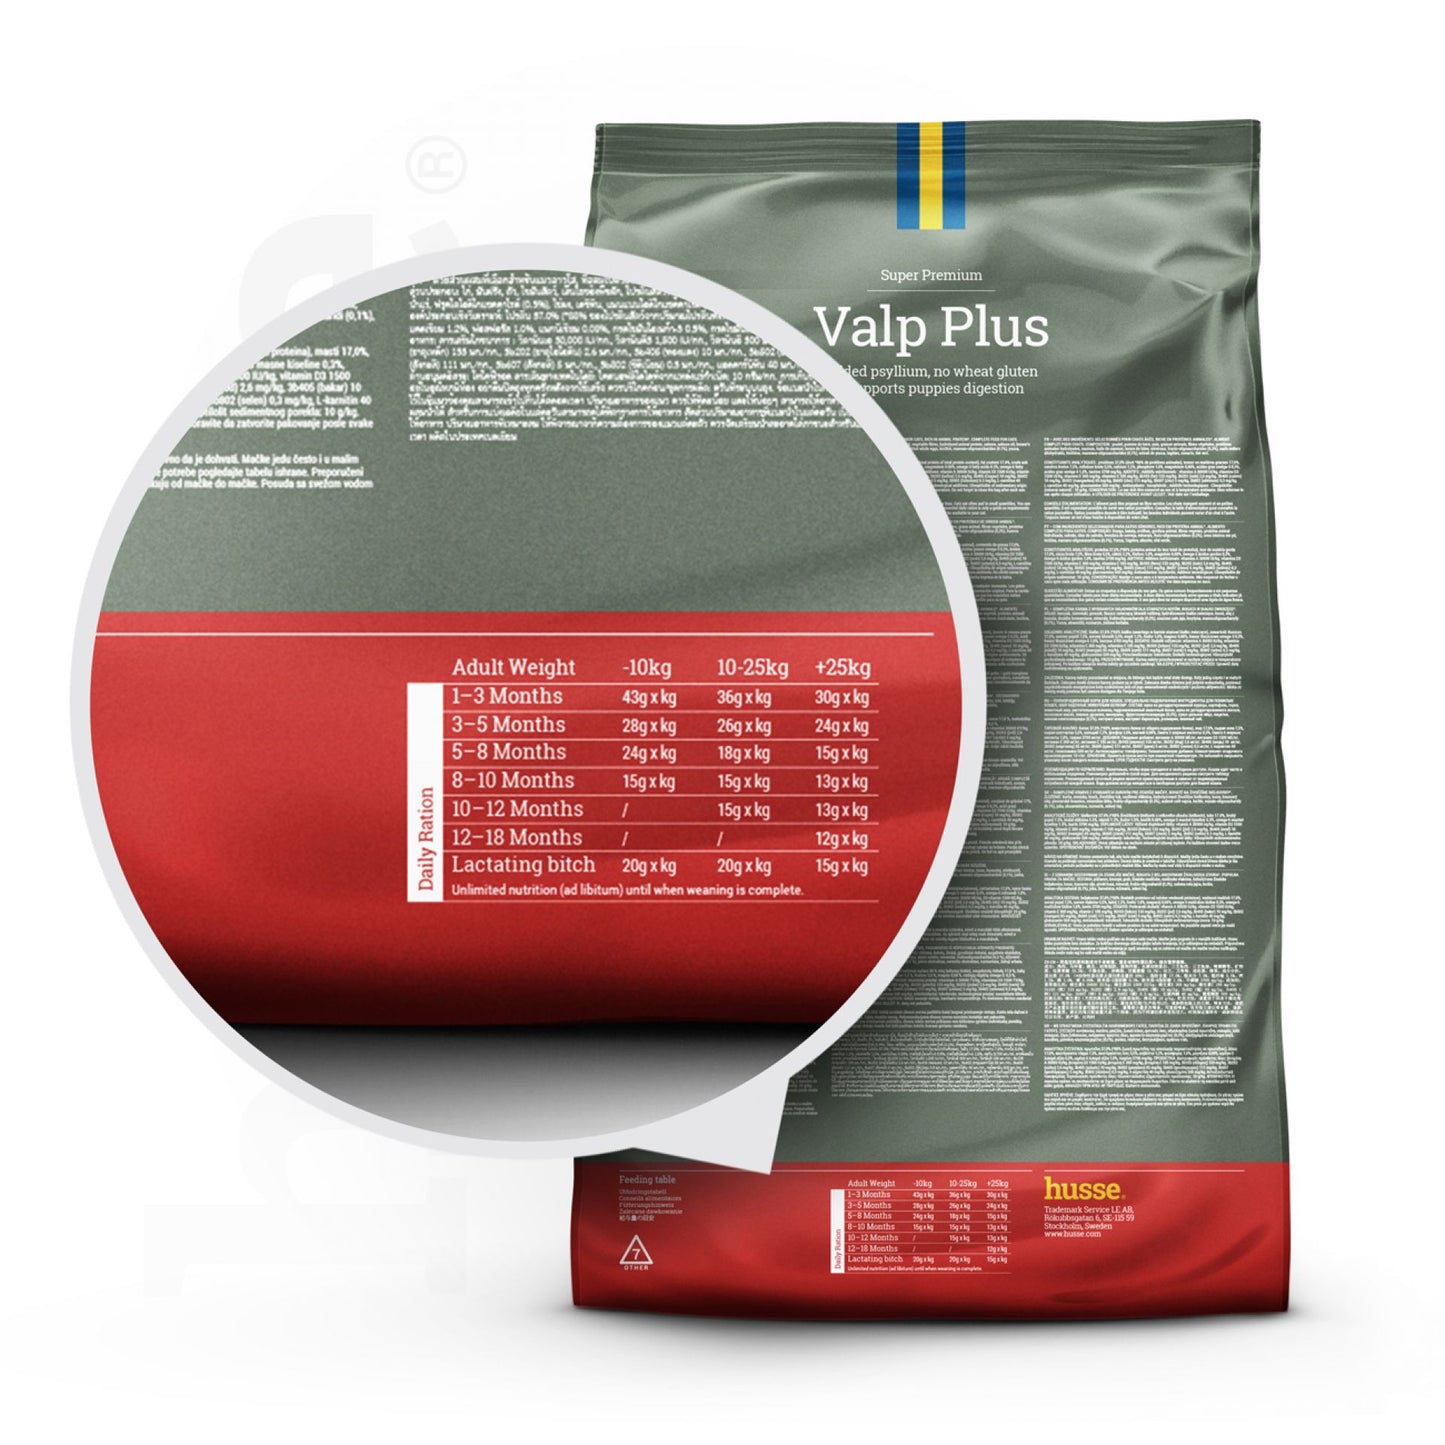 Valp Plus | Complete nutrition with psyllium & vegetable fibres for smooth digestion